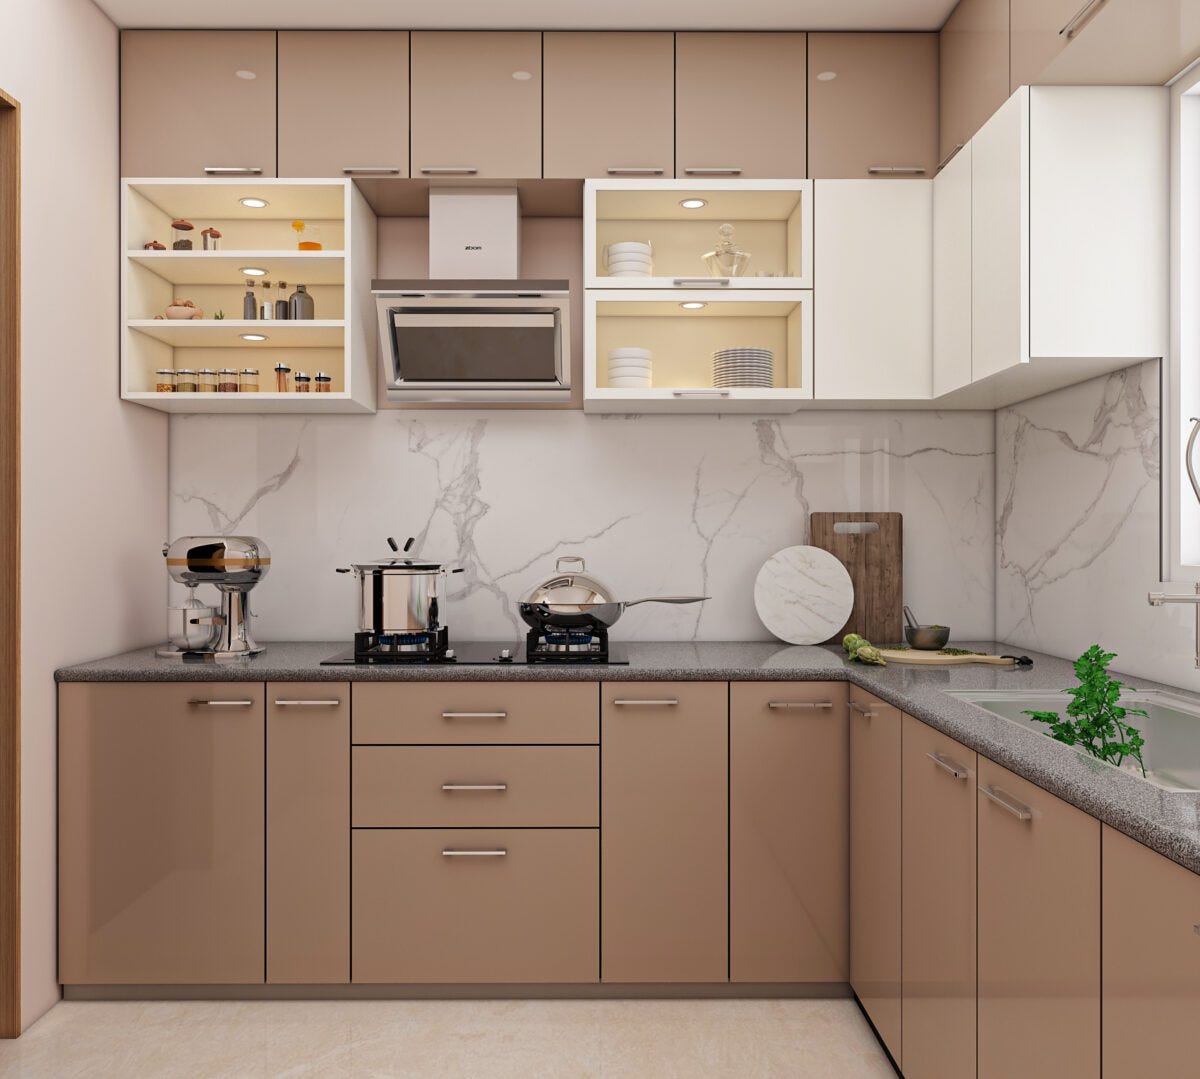 Which Apartment Kitchen Layout Fits Your Needs?